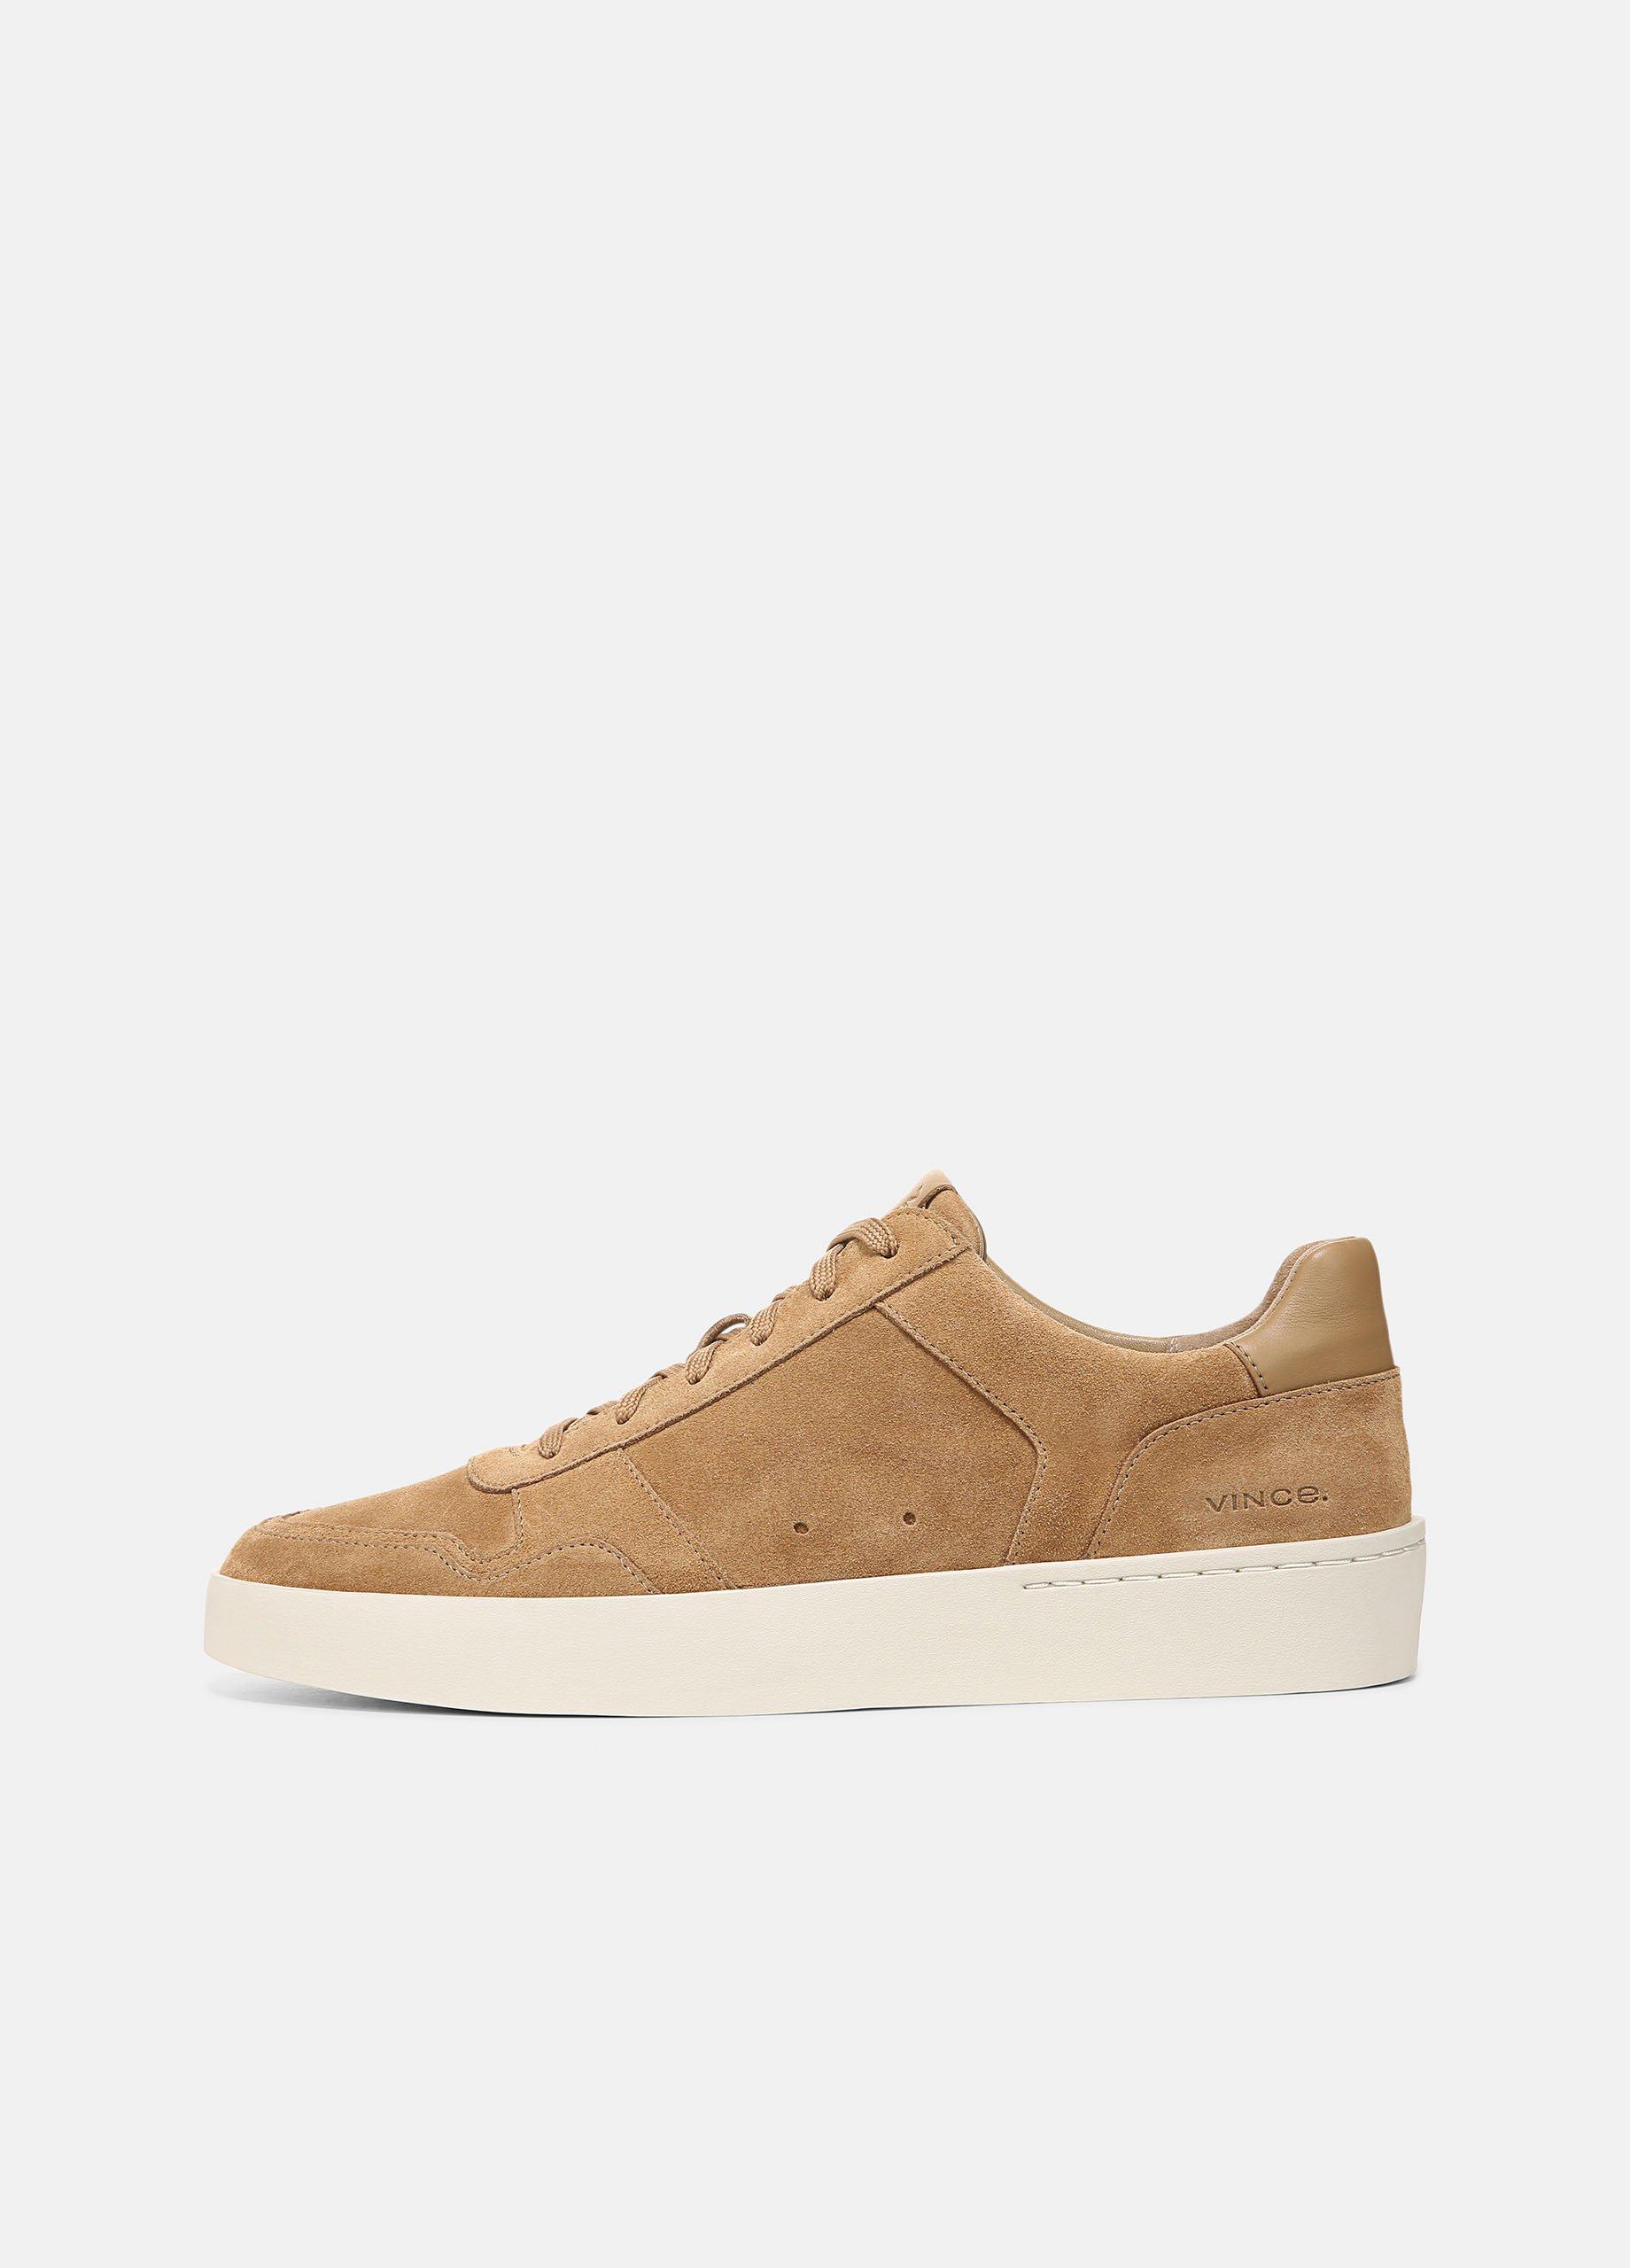 Peyton Leather Lace-Up Sneaker, New Camel, Size 8 Vince